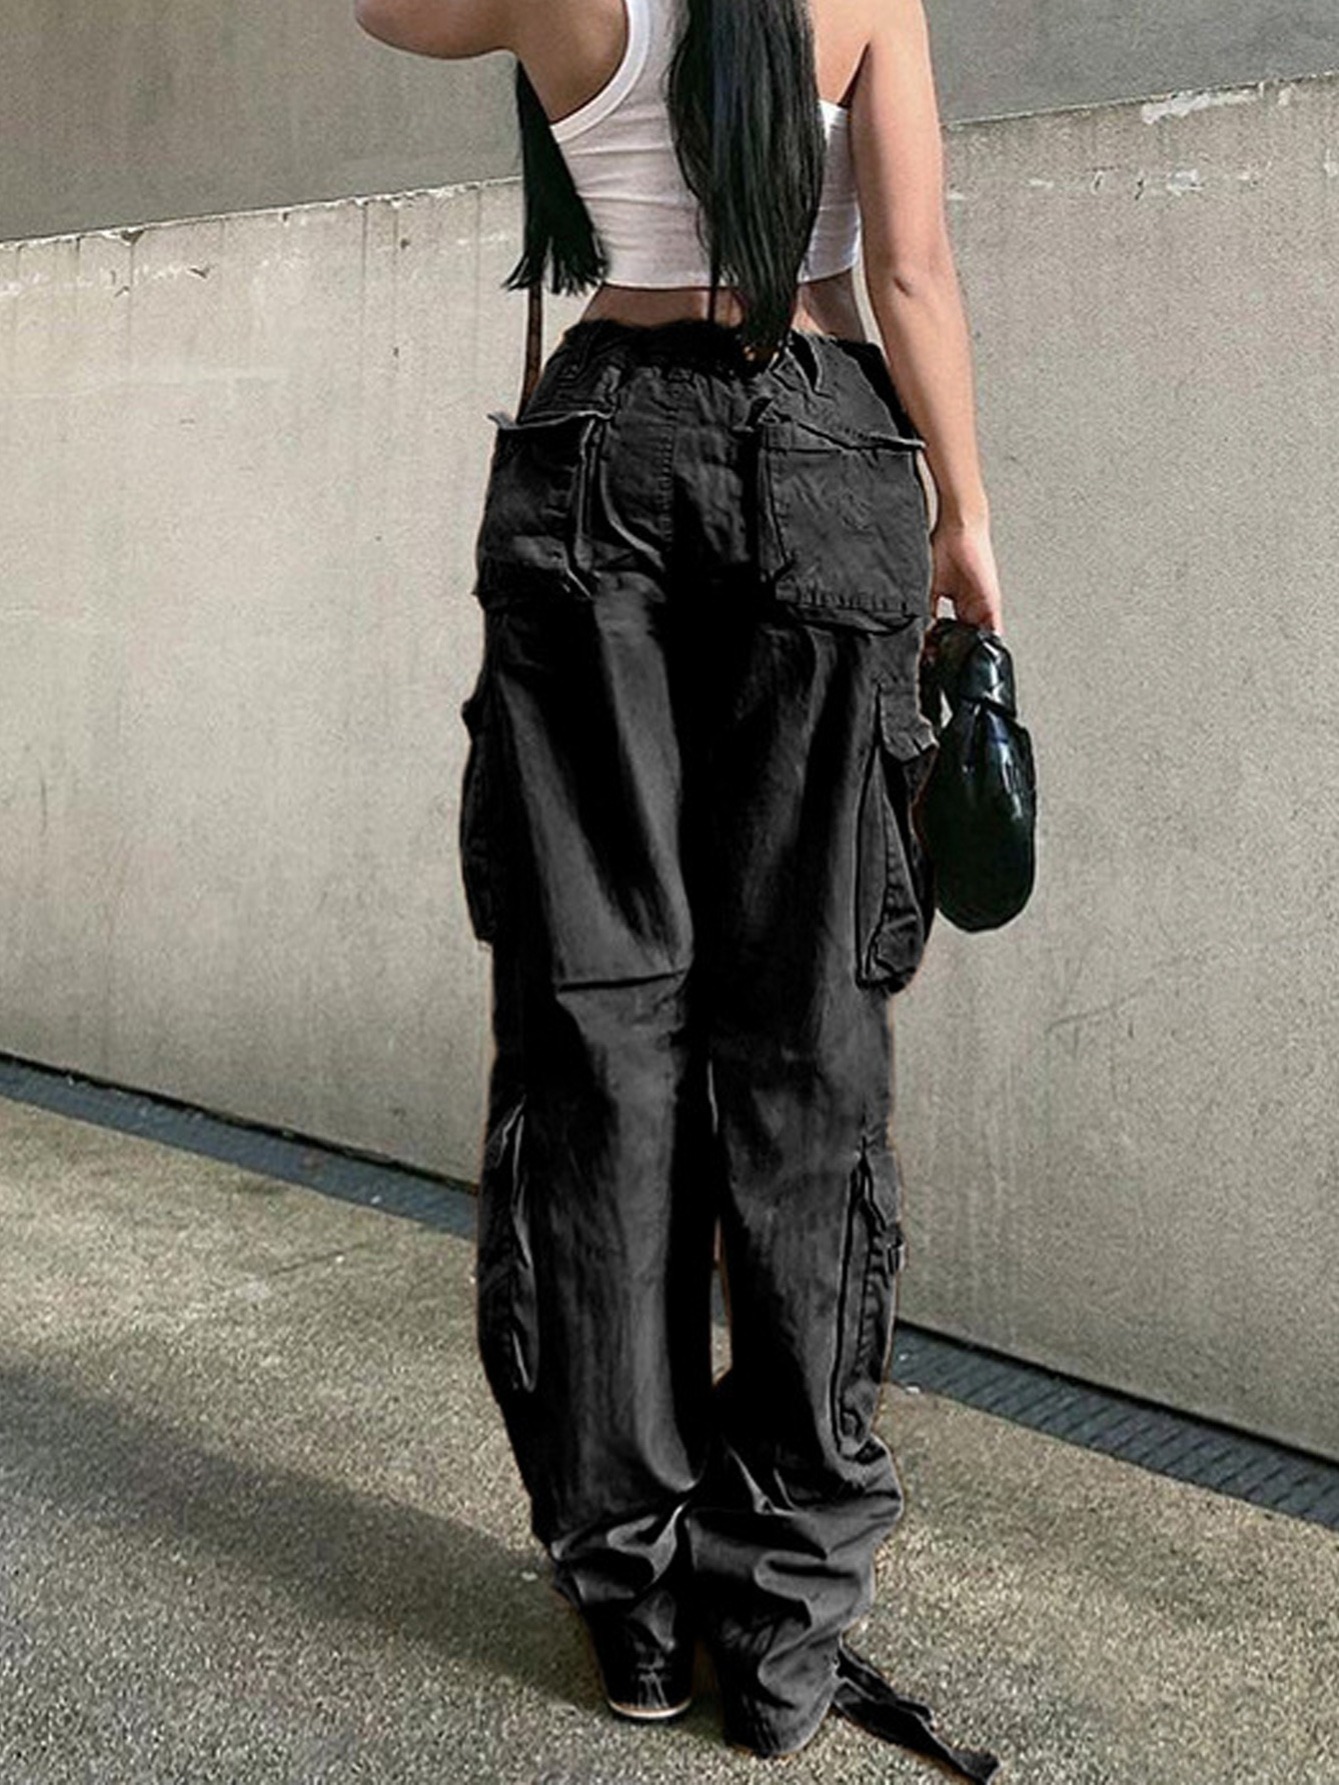 Vintage High Waisted Brown Cargo Pants Women For Women Loose Fit Y2K Pants  With Pocket, Hip Hop Style Style 230505 From Hui02, $24.83